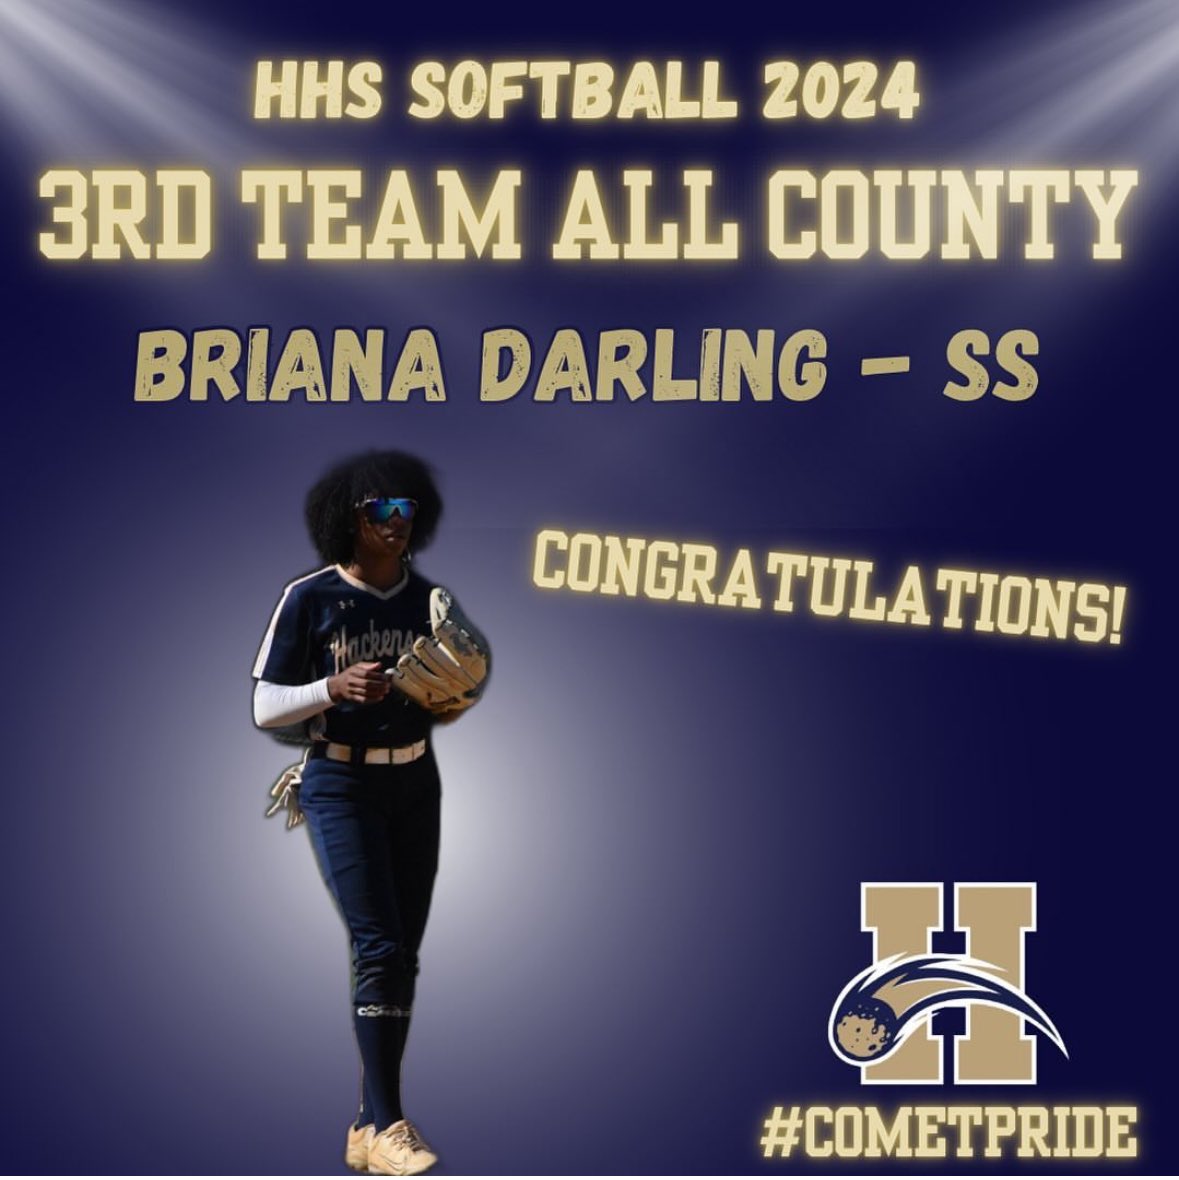 Congratulations @BrianaDarling08 well deserved, unbelievably dynamic player, with a bright future ahead #CometPride @GordonScooter @HackensackAthl1 @HHSComets @NJHEISTSOFTBALL